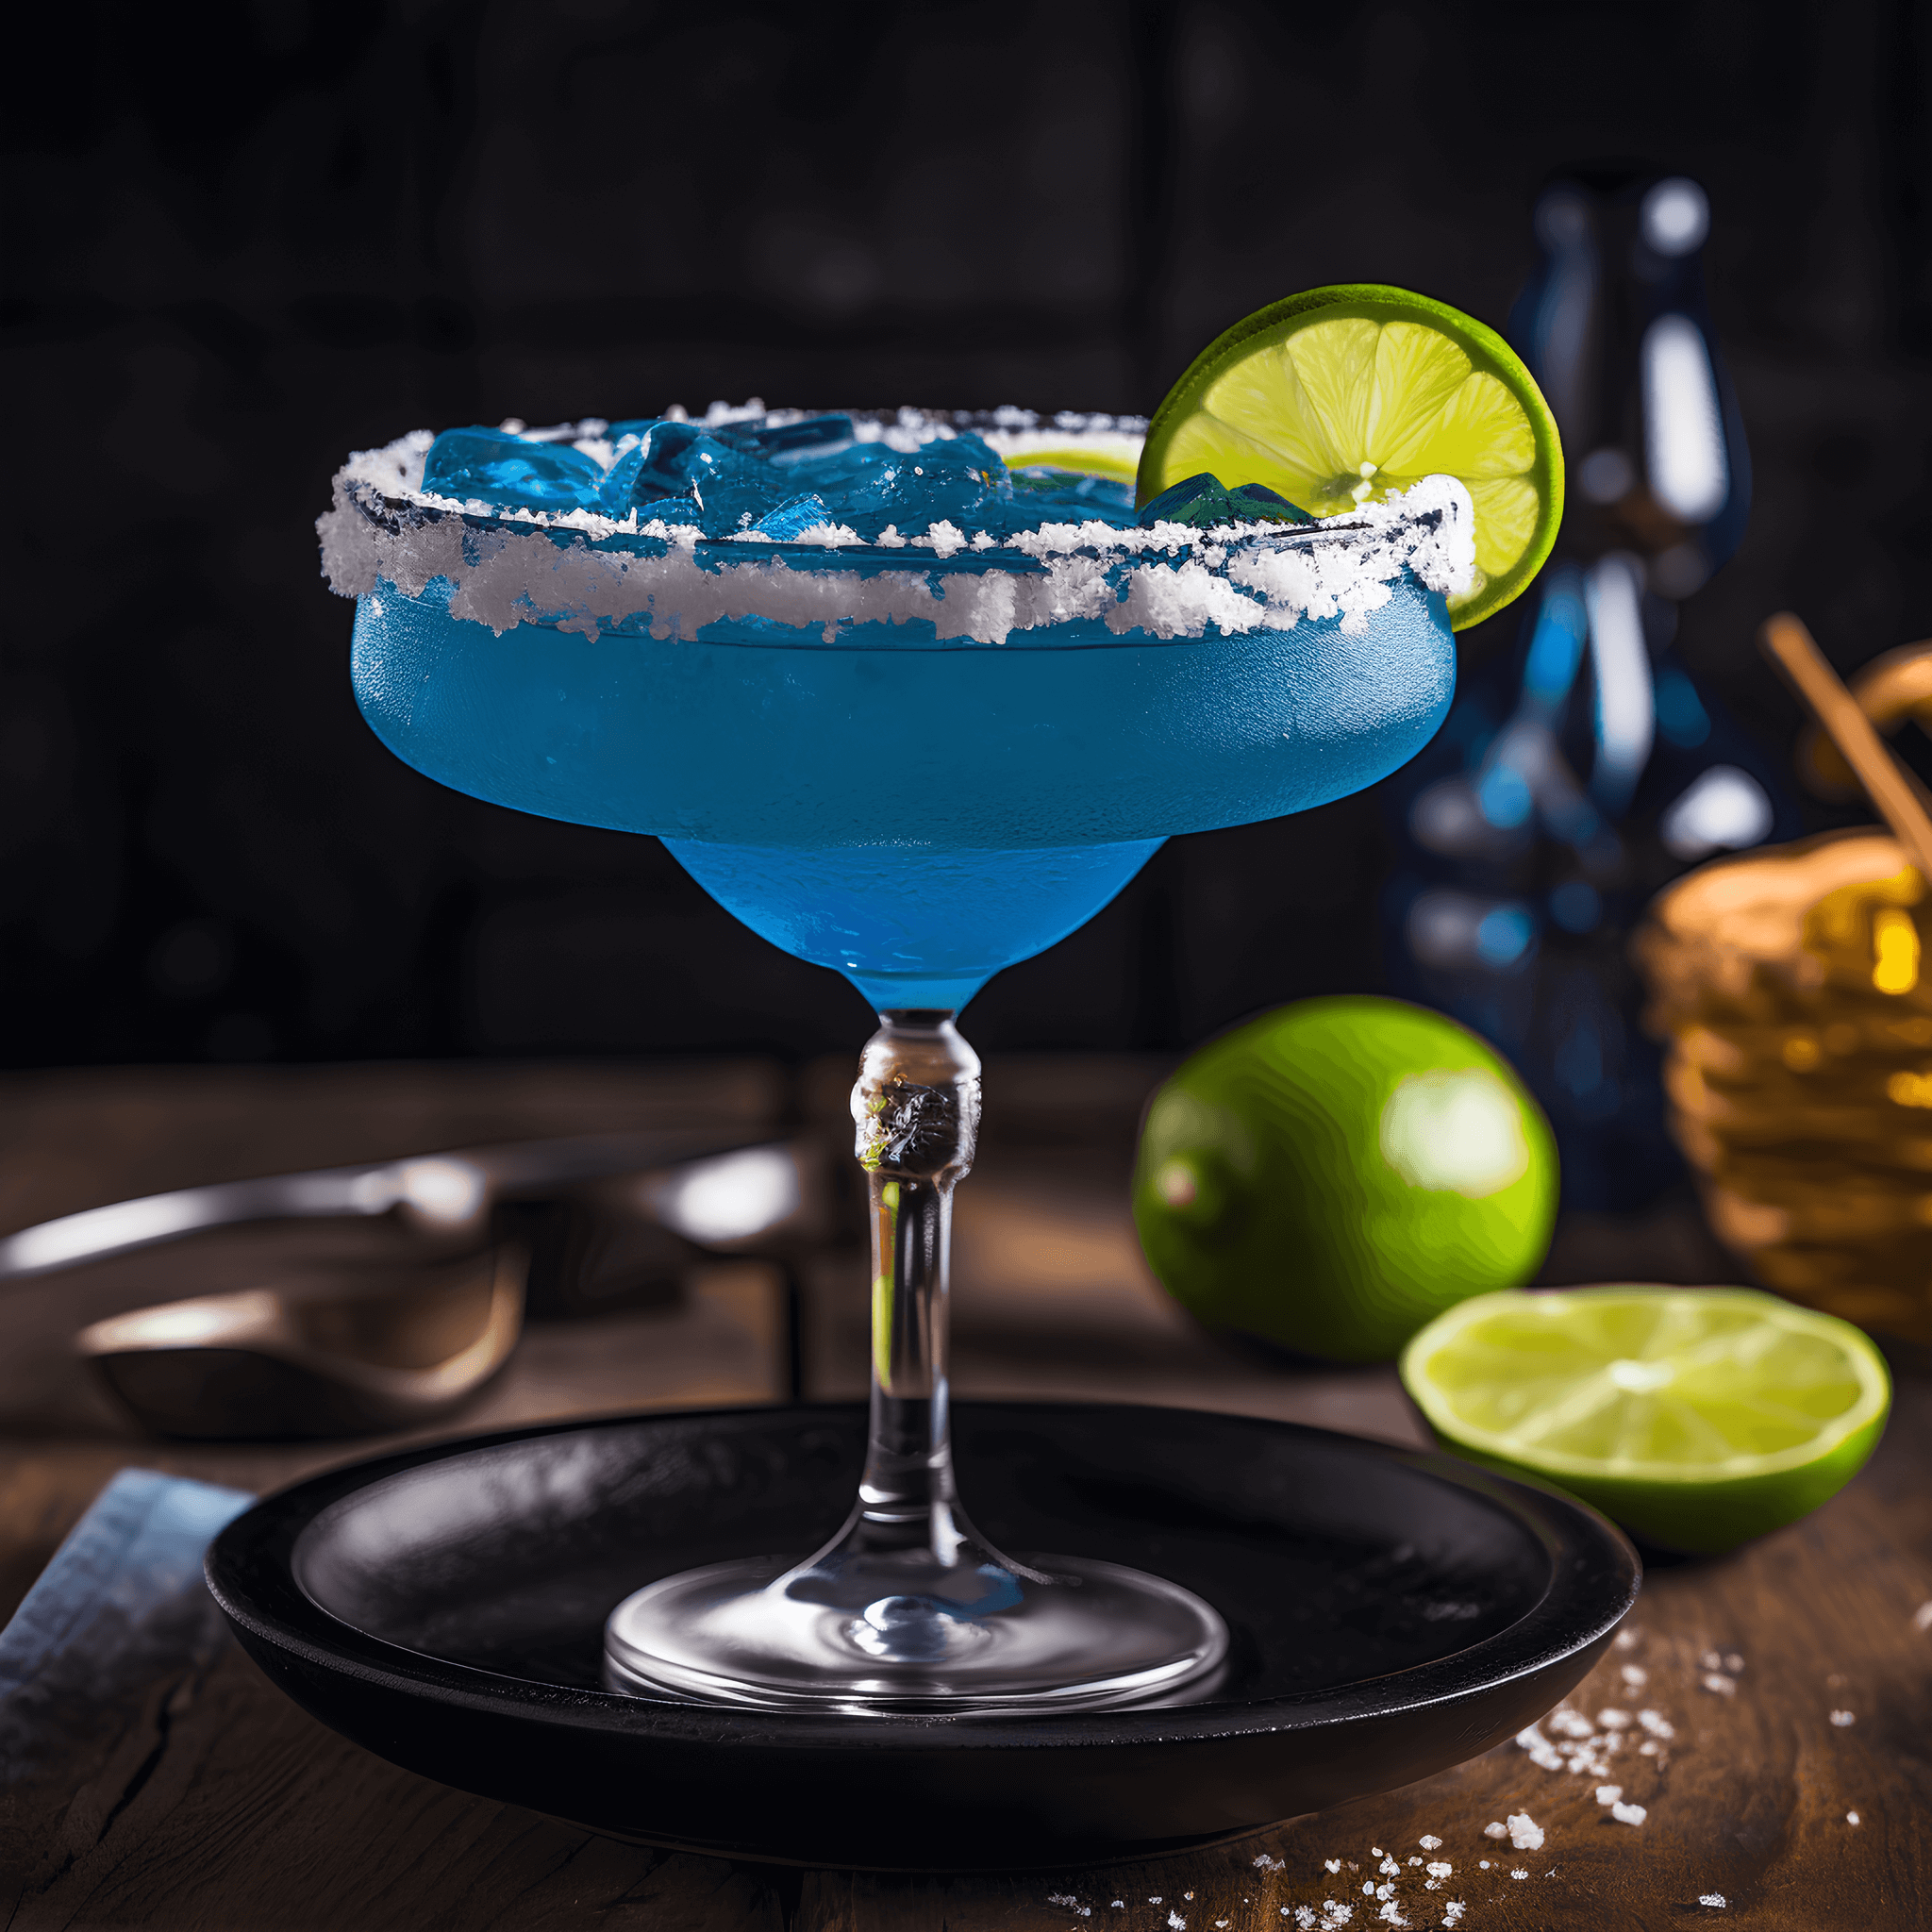 The Blue Margarita has a well-balanced taste, combining the tangy and sour flavors of lime and orange liqueur with the sweetness of blue curaçao. It is a strong and refreshing cocktail with a hint of tropical fruitiness.